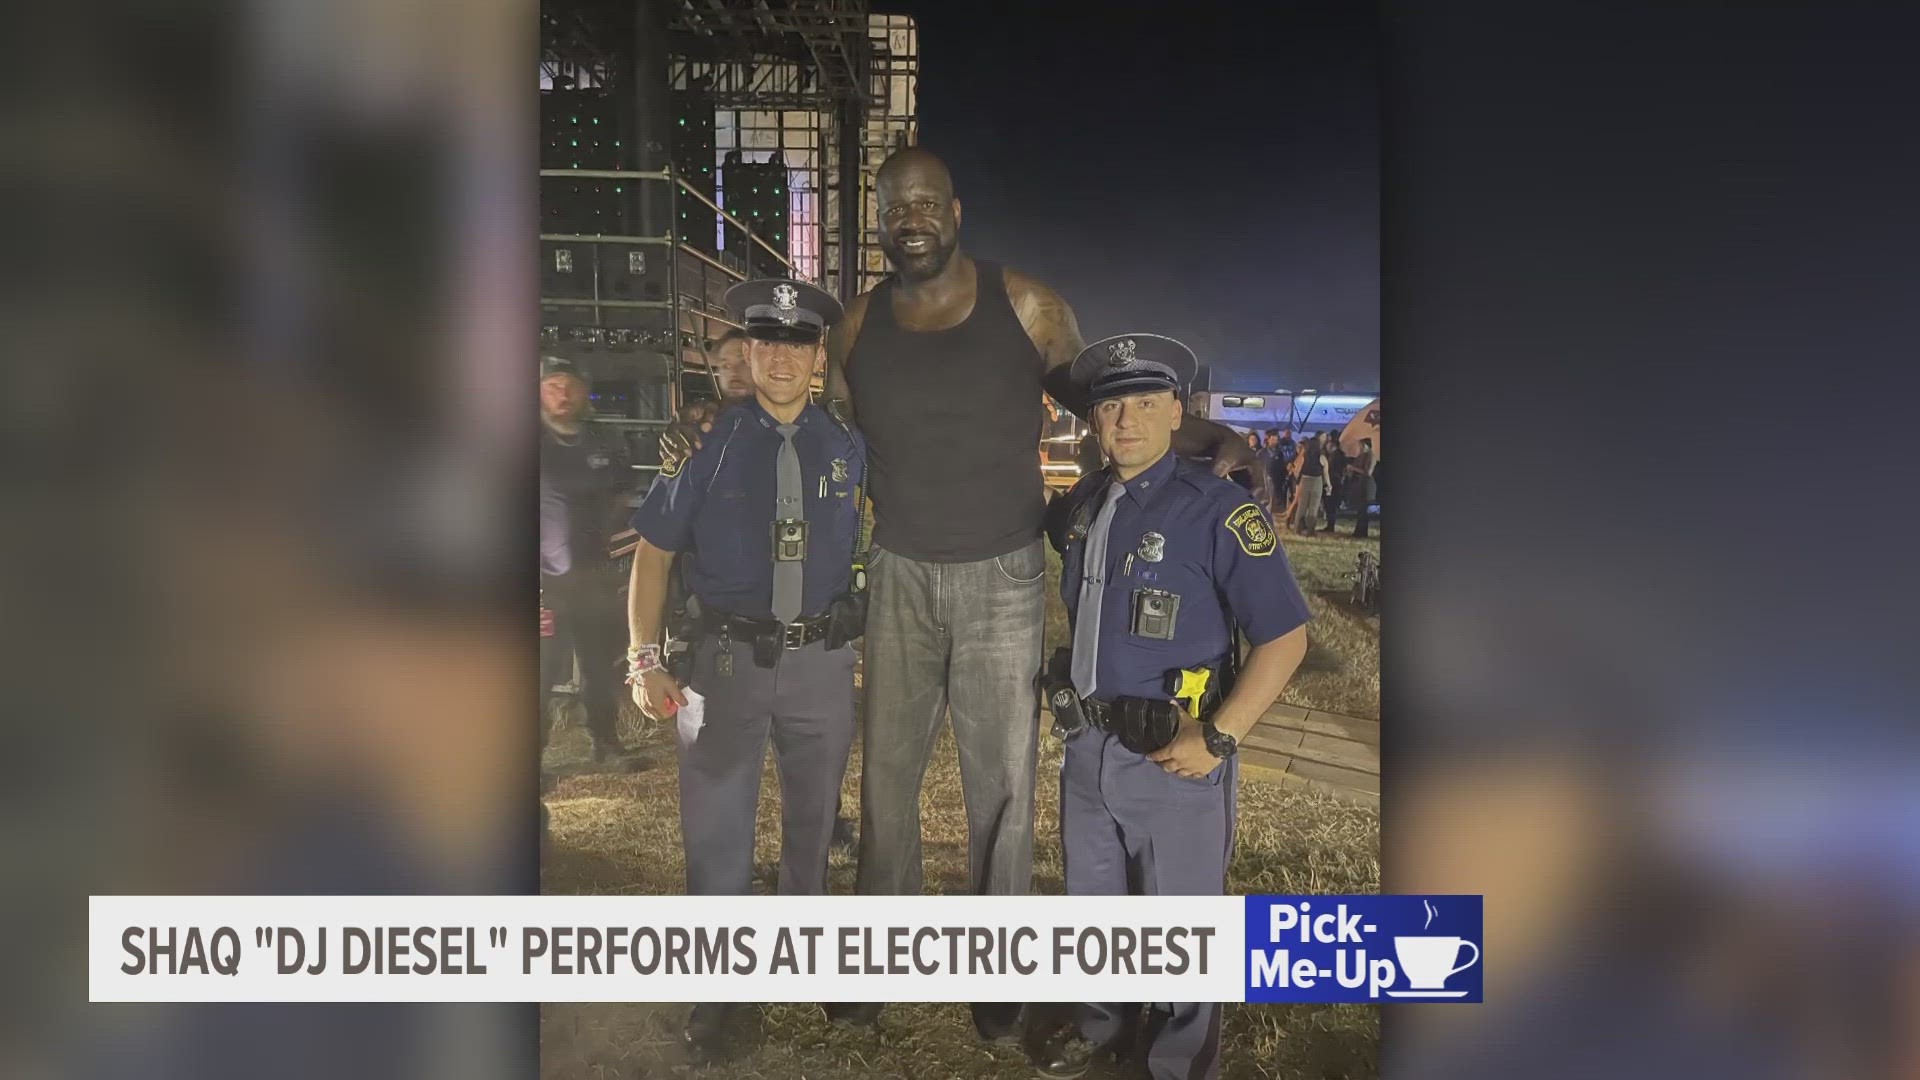 Festival goers at Electric Forest in Rothbury, Michigan this weekend may have noticed a DJ towering above the crowds — and not just because of the stage.